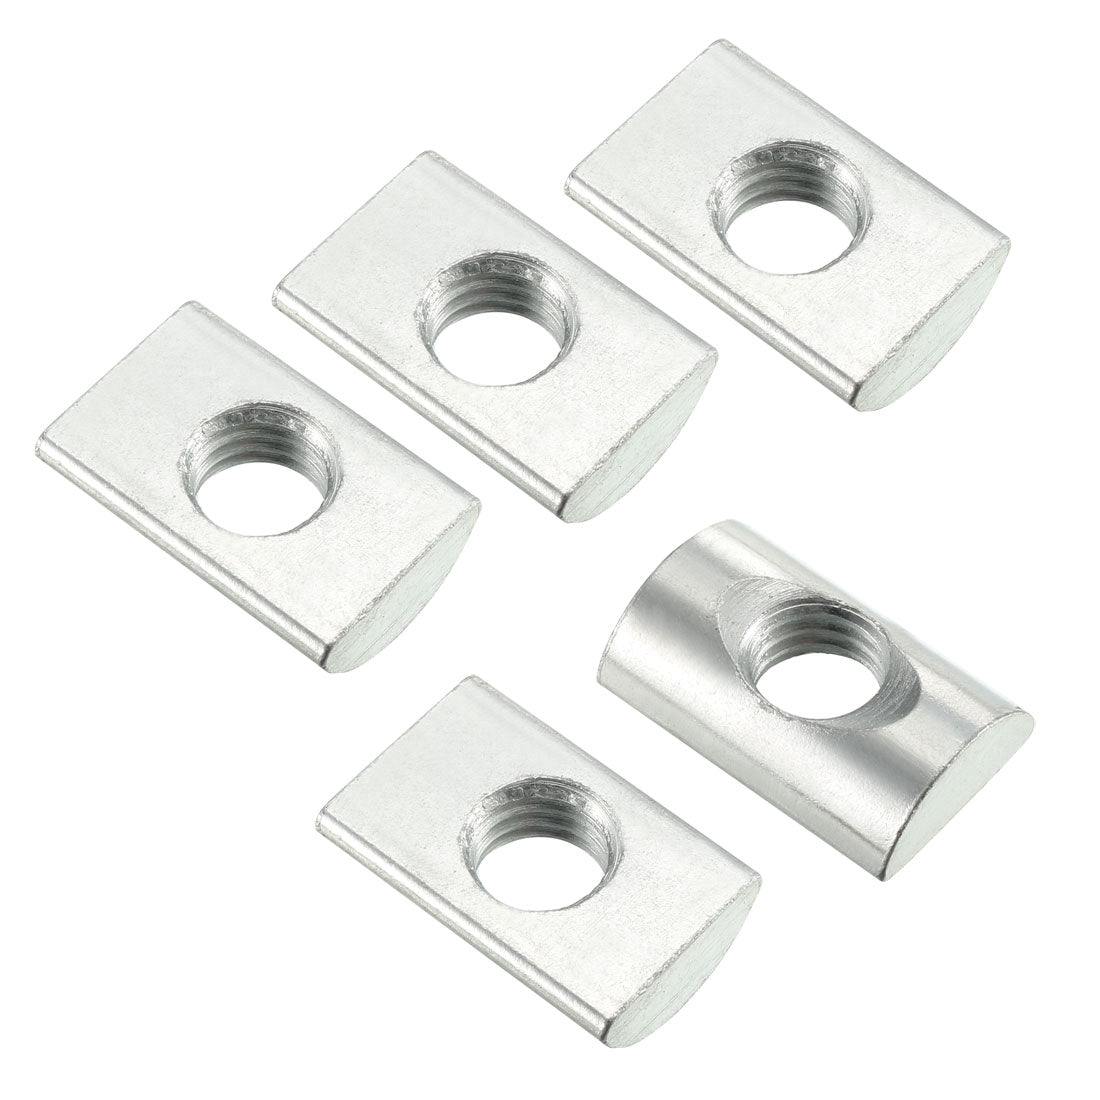 Uxcell Uxcell M8 Half Round Roll-in Nut for 4040 Series Aluminum Extrusions Profile 5pcs